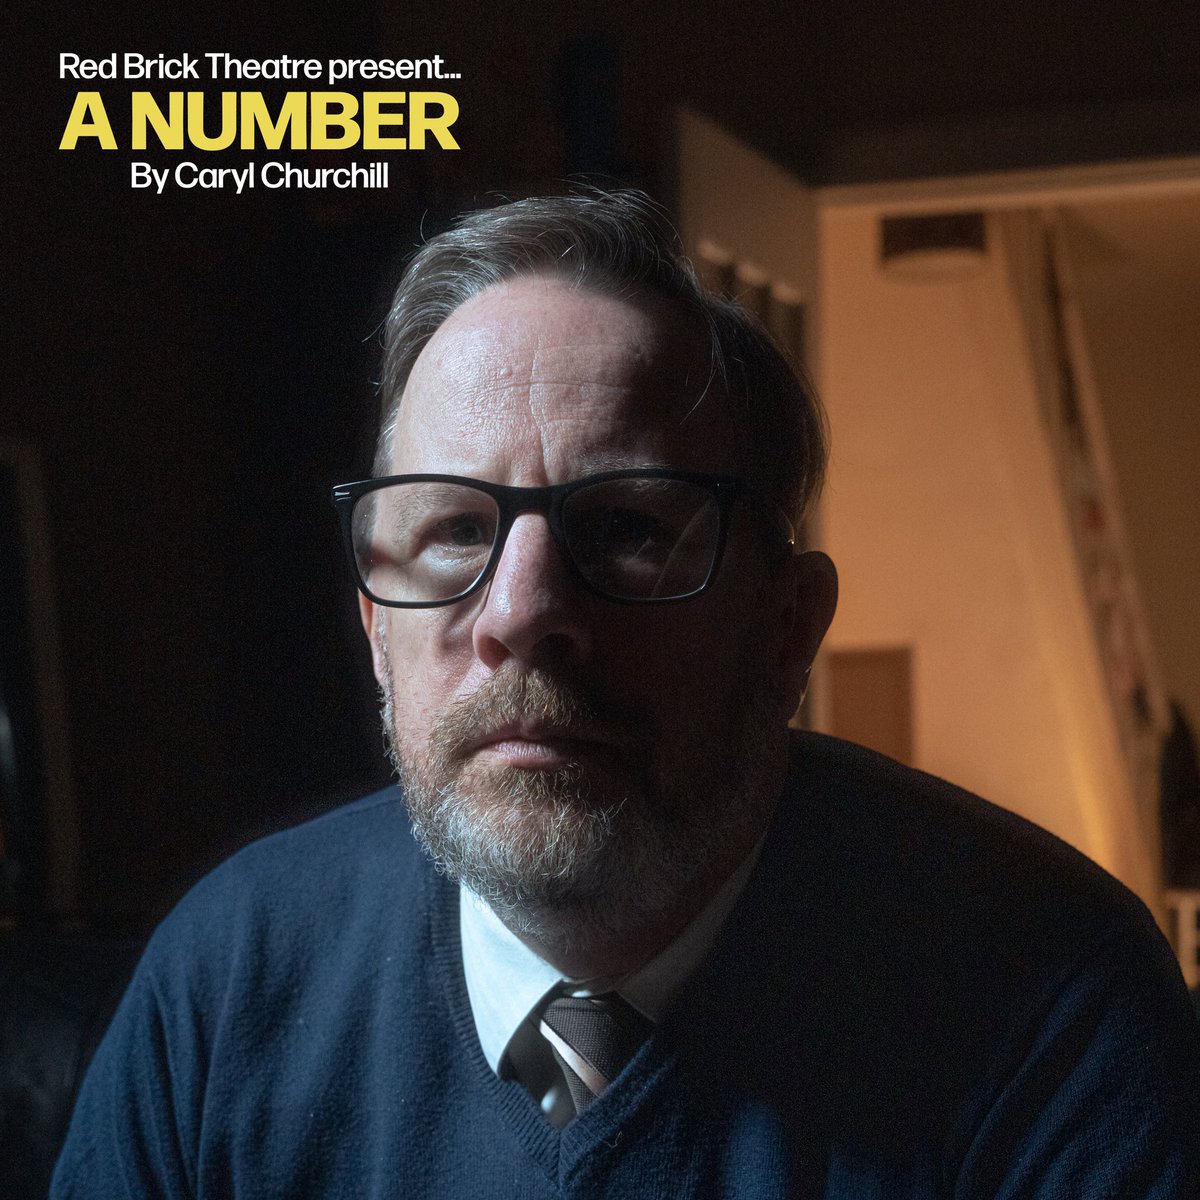 JOE SIMPSON as SALTER. A NUMBER opens @53two in 1 month! 📅 22nd - 24th May 🎟️ £2/£11 👉 bit.ly/3UIWT2t 📸 Harry Green @JoeSimpson66